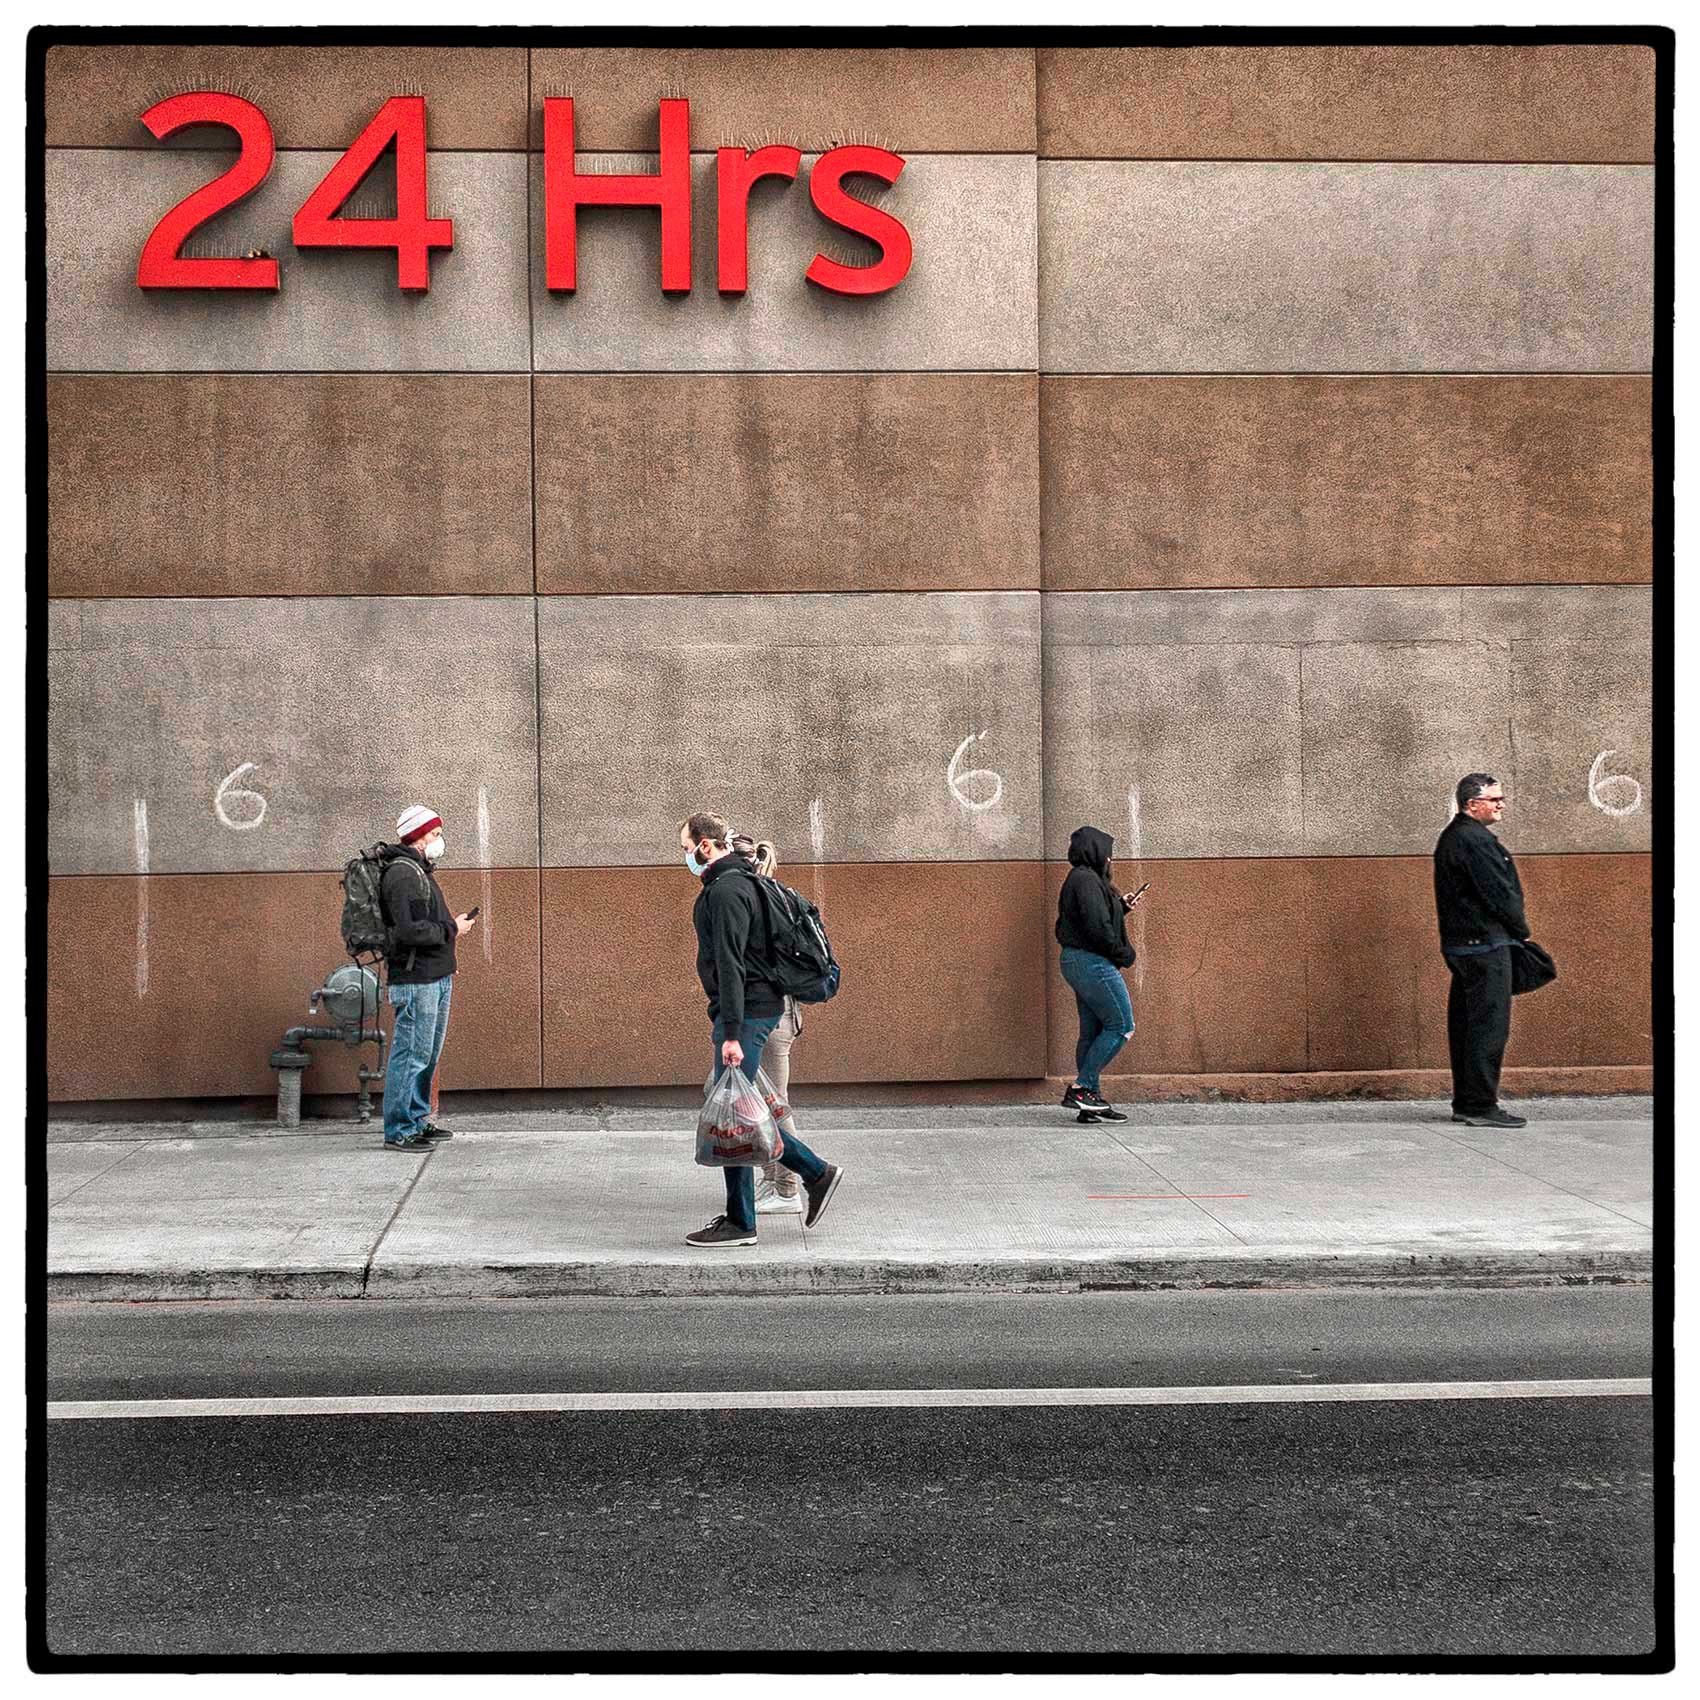 shoppers socially distance as they wait in line outside a toronto grocery store during the pandemic